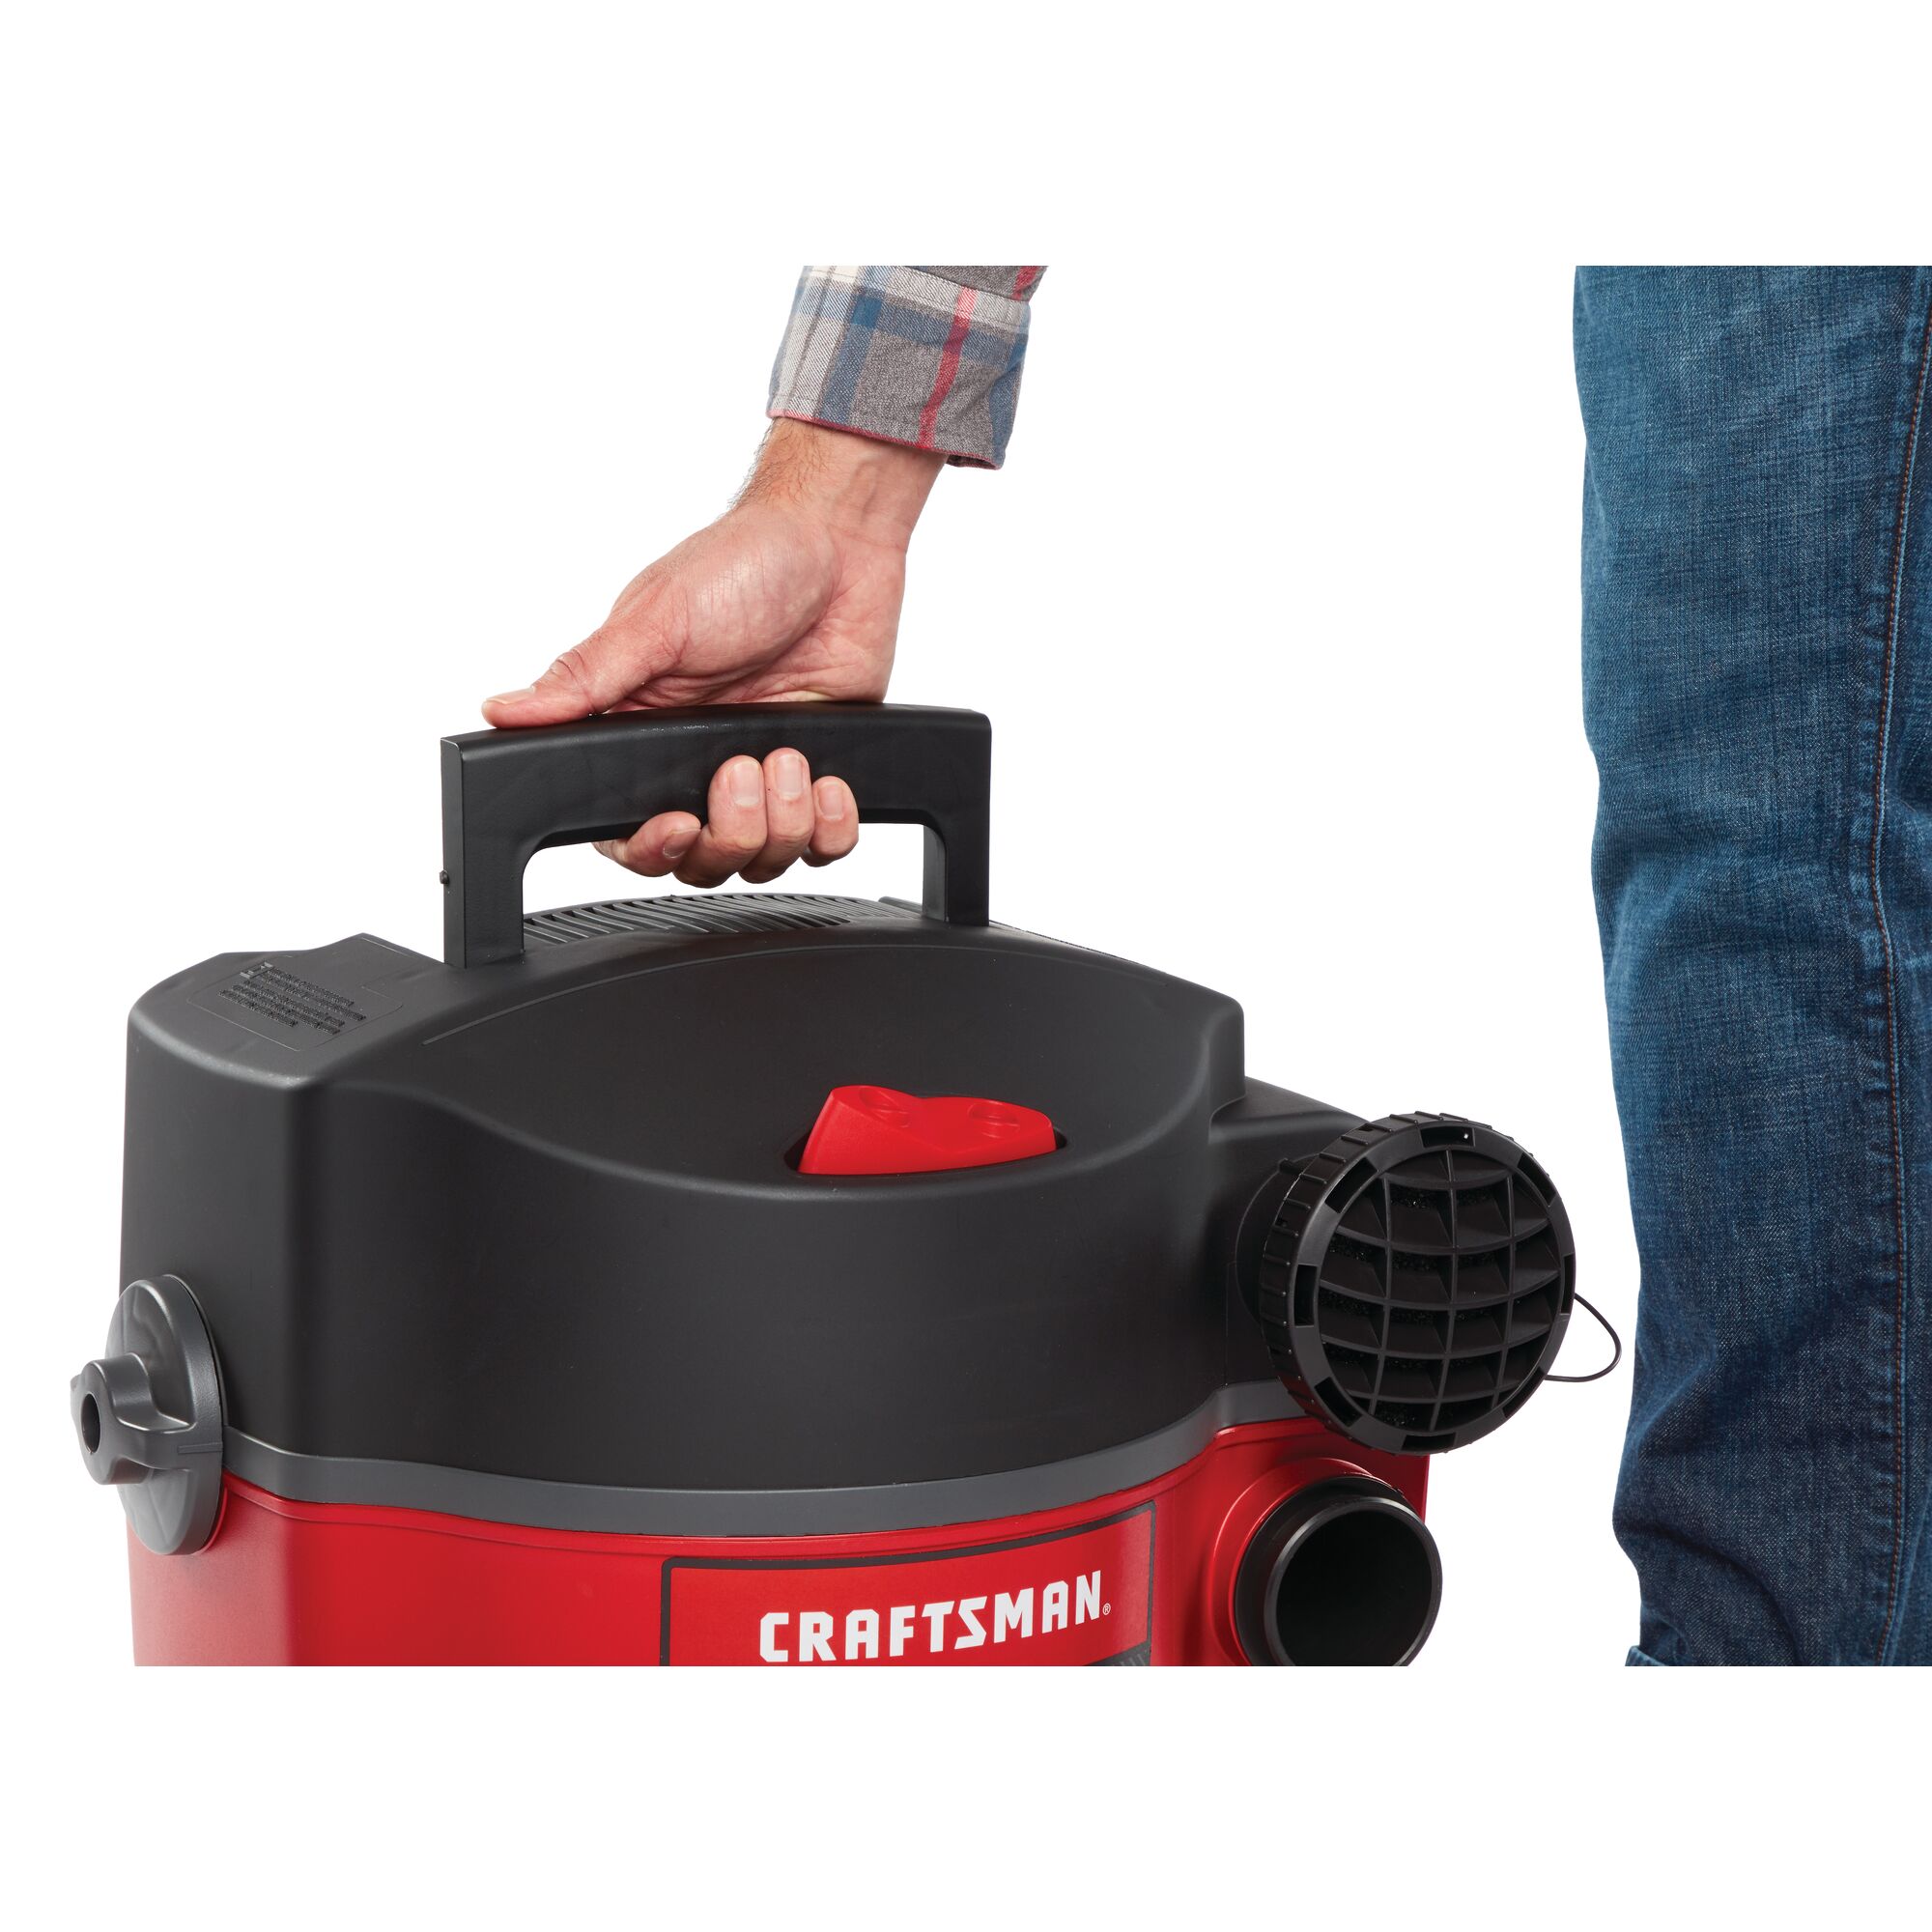 View of CRAFTSMAN Vacuums: Wet/Dry Shop Vac highlighting product features